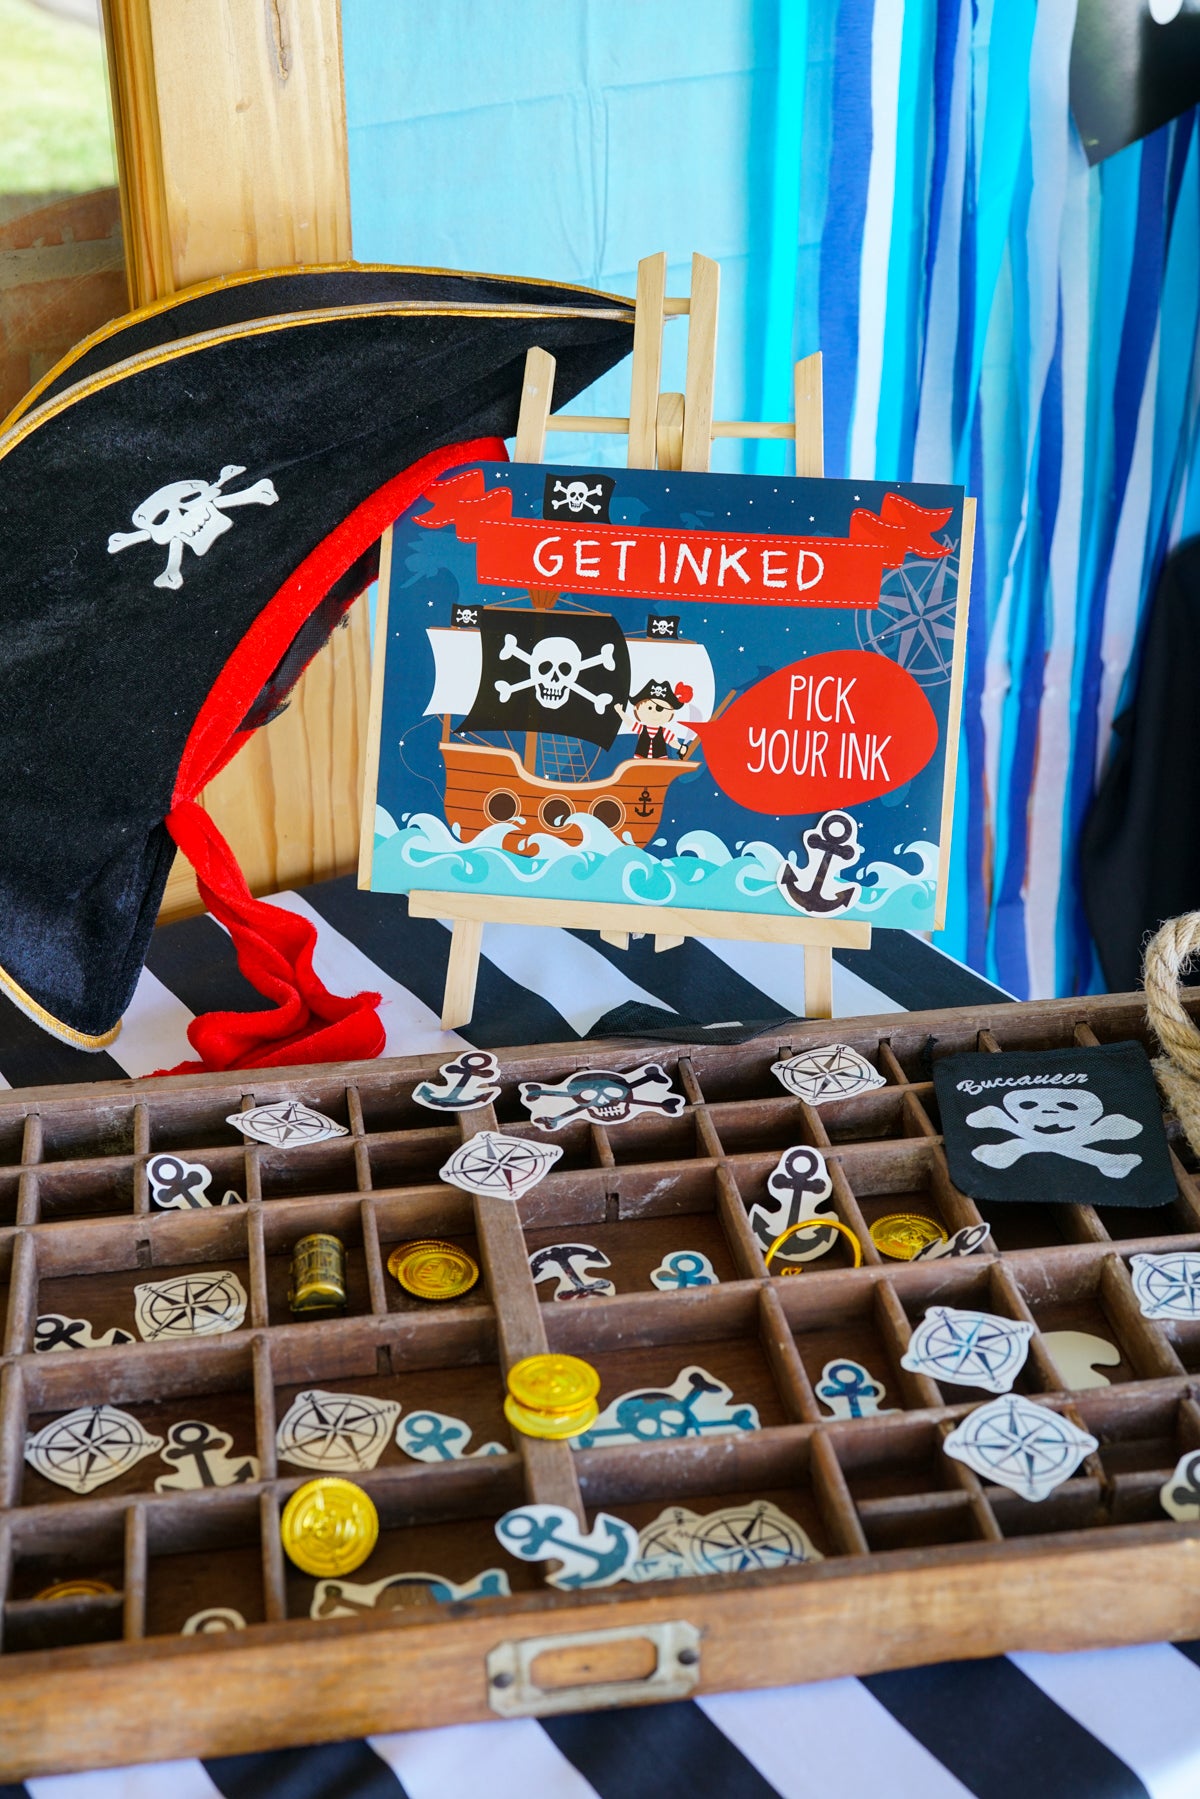 Pirate Party Tattoos and signs - Get Inked